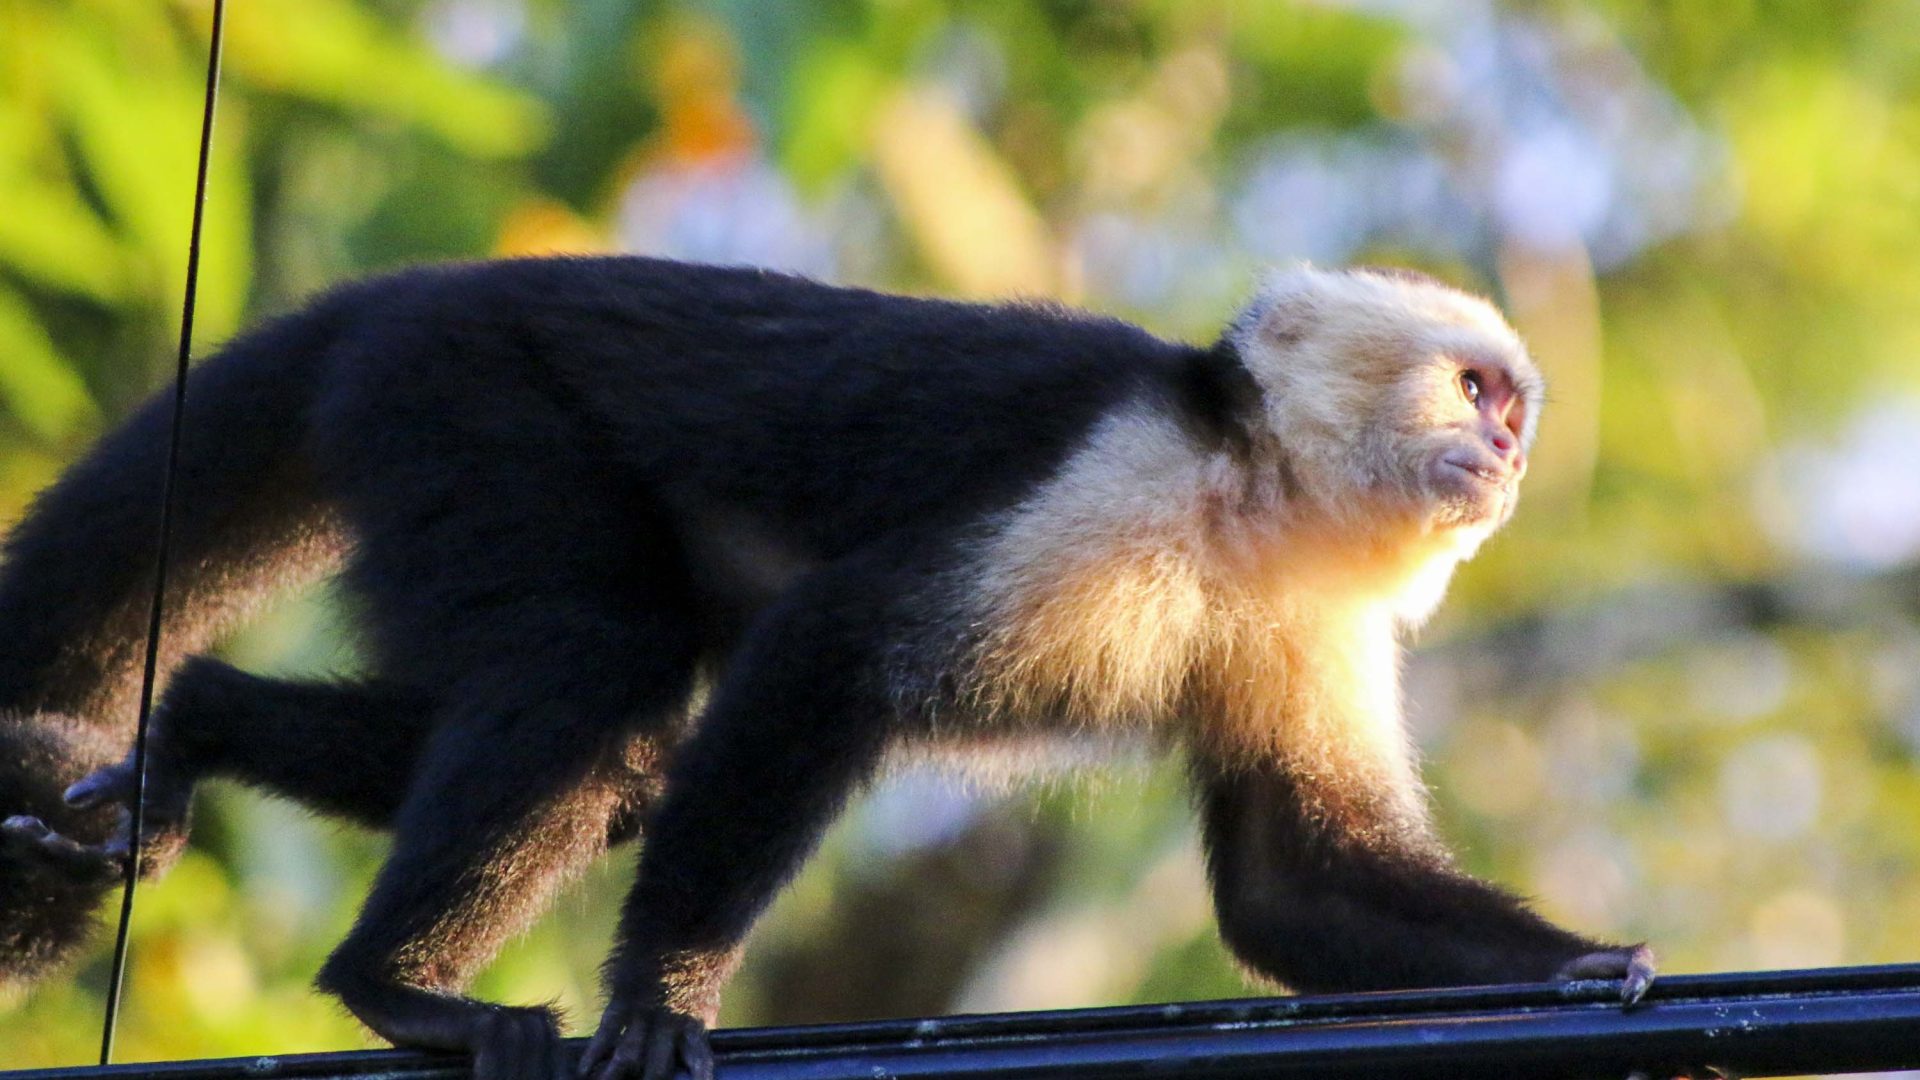 A primate walks across a branch. It has soft sun illuminating its fur which is white and black.